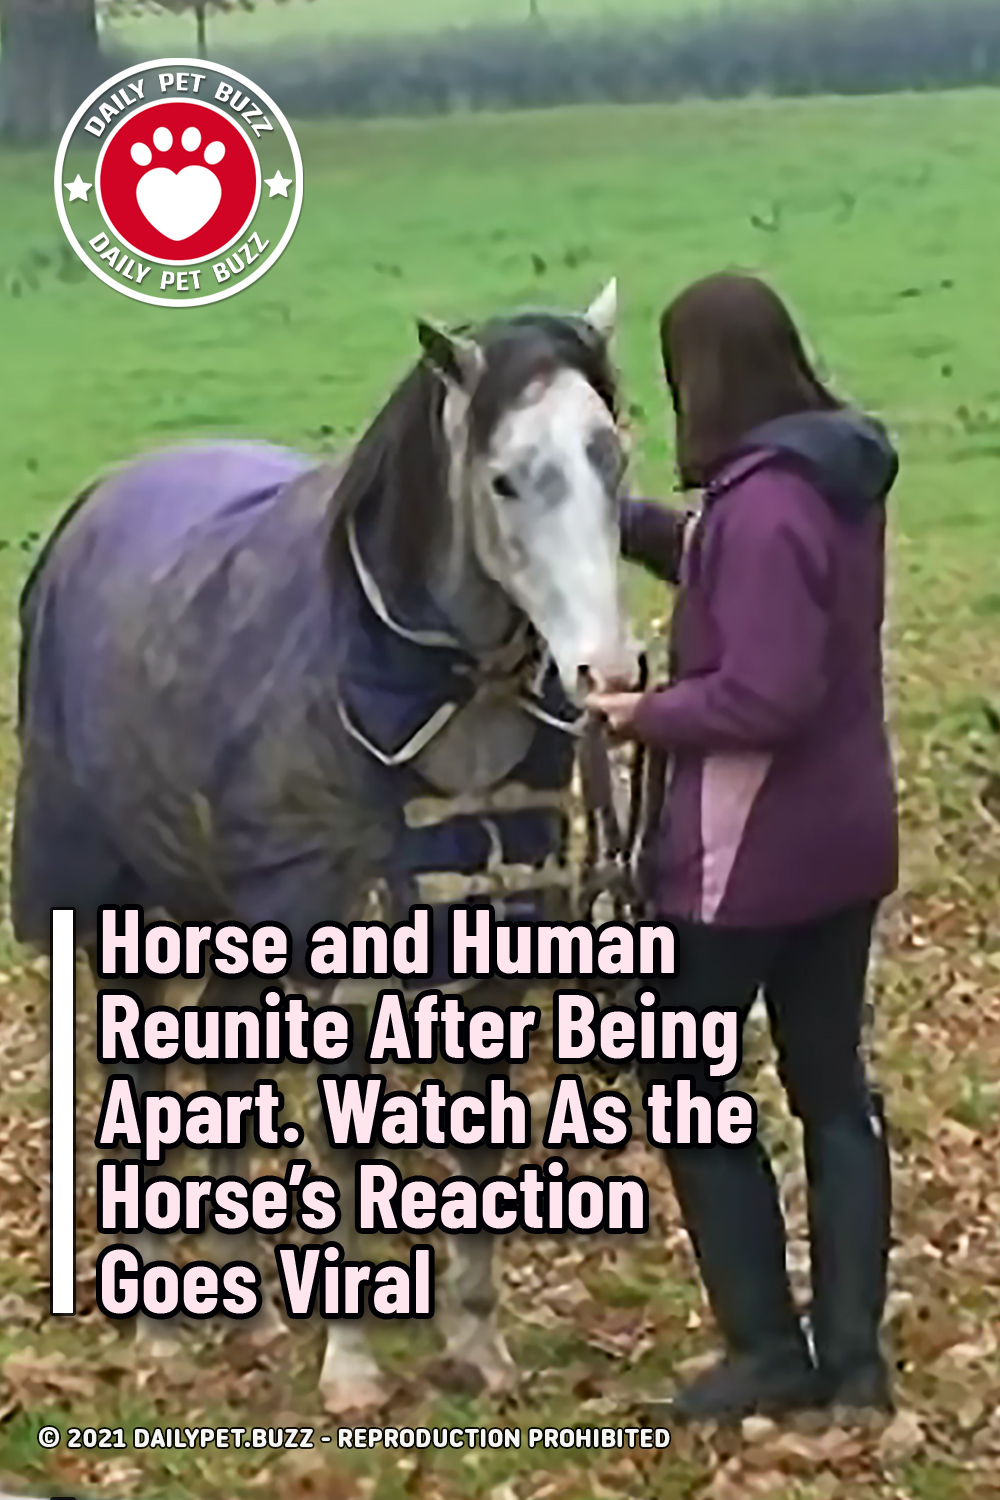 Horse and Human Reunite After Being Apart. Watch As the Horse’s Reaction Goes Viral